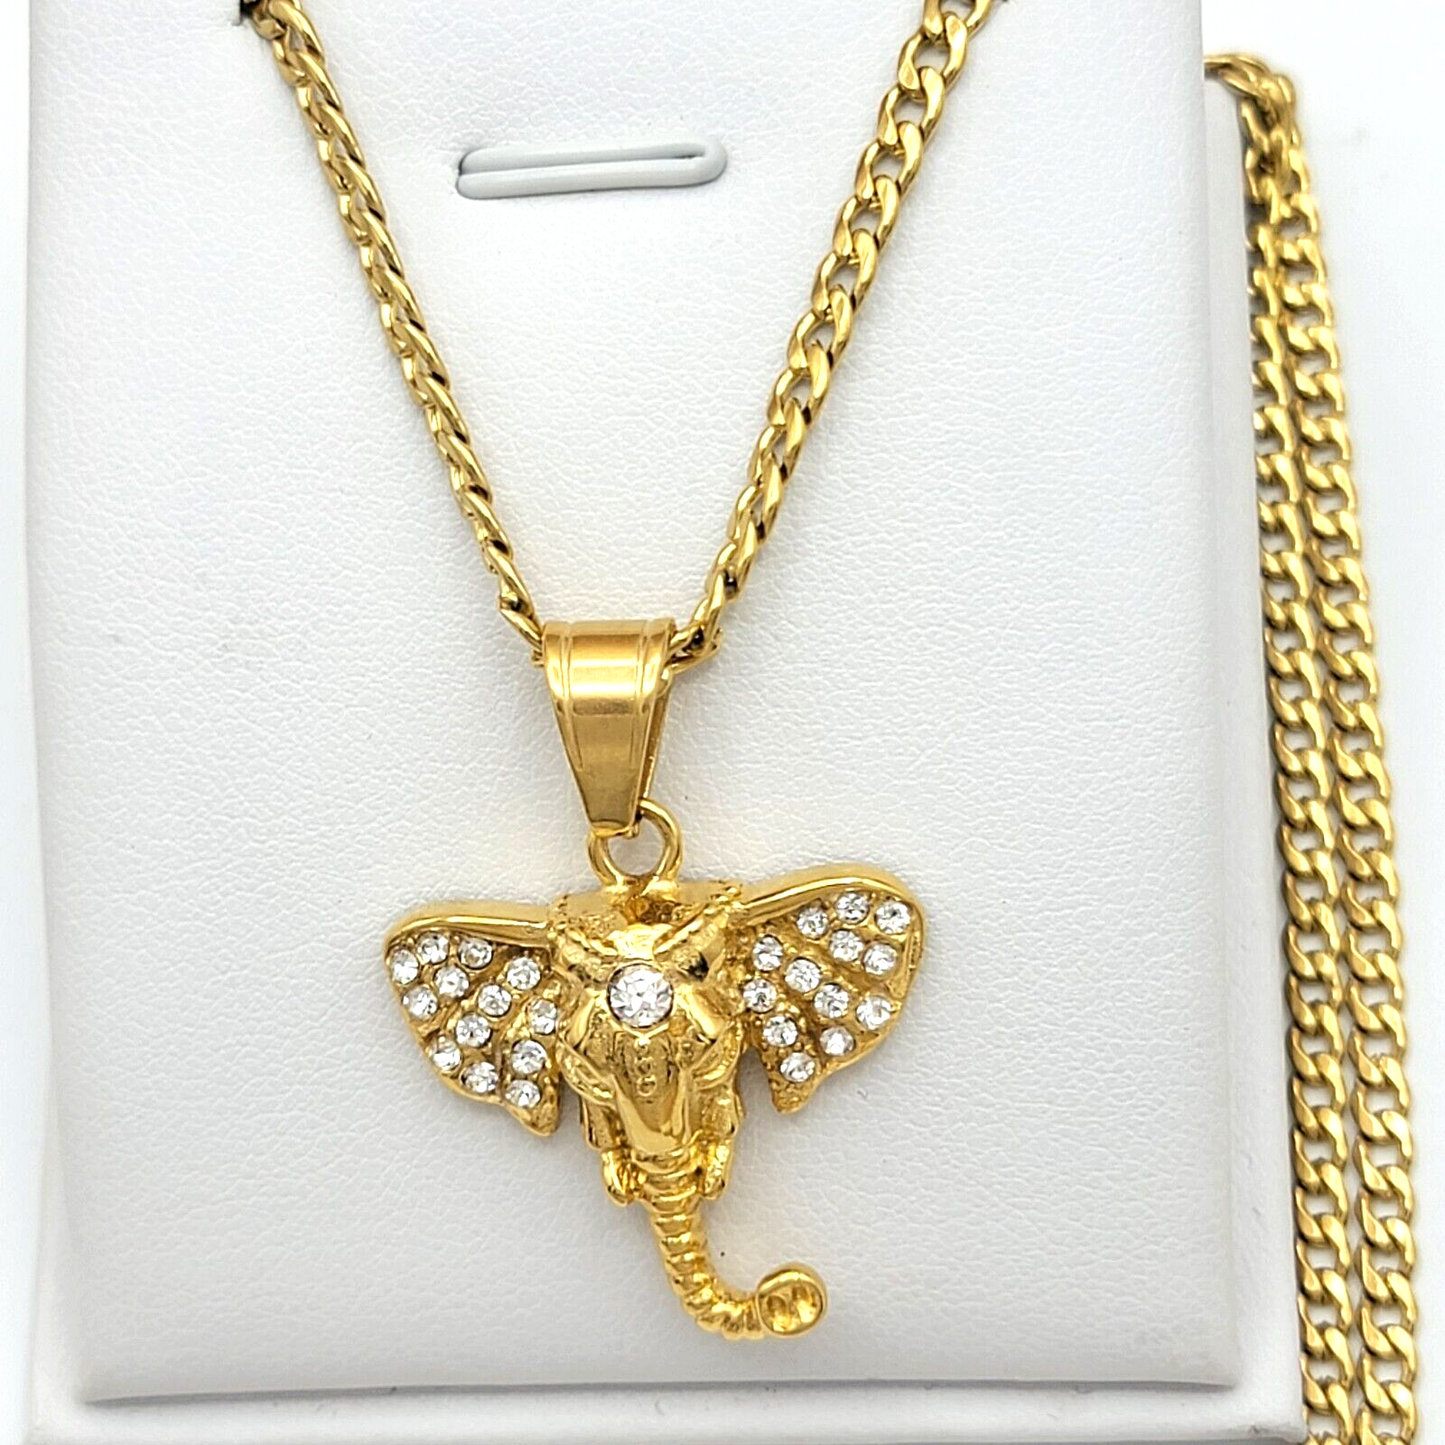 Necklaces - Stainless Steel Gold Plated. CZ Elephant Pendant & Chain.